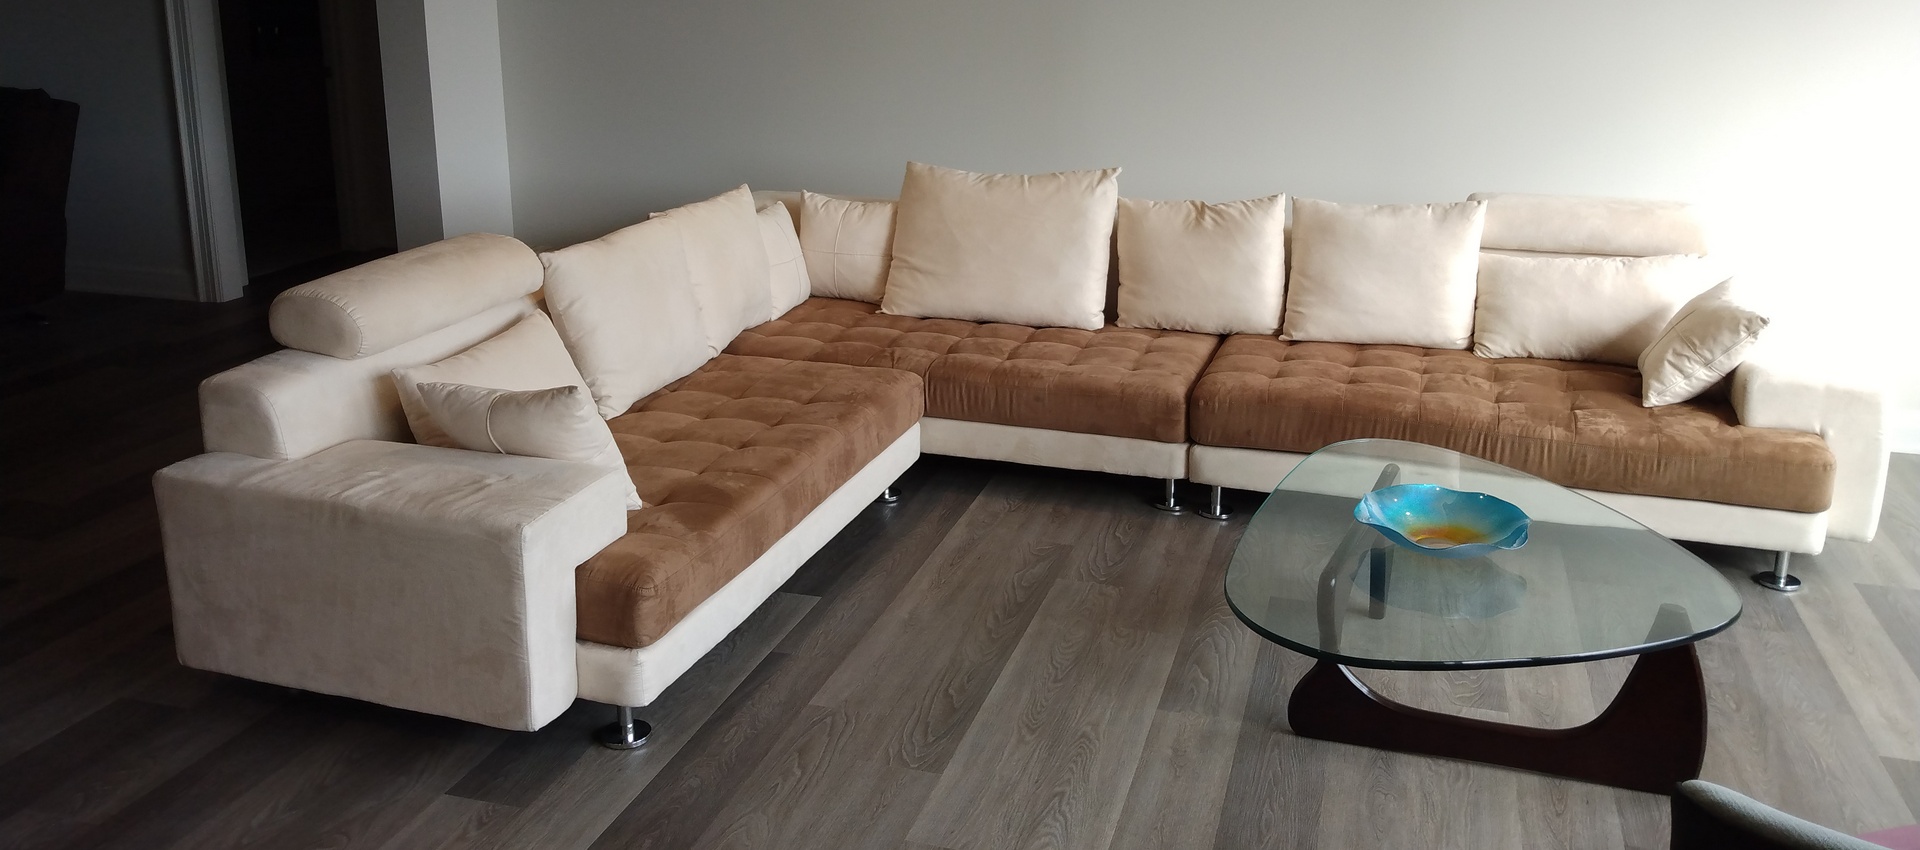 L-shape milk and brown sofa and glass table. How to get furniture assembled and save? - Pro Furniture Assembly.